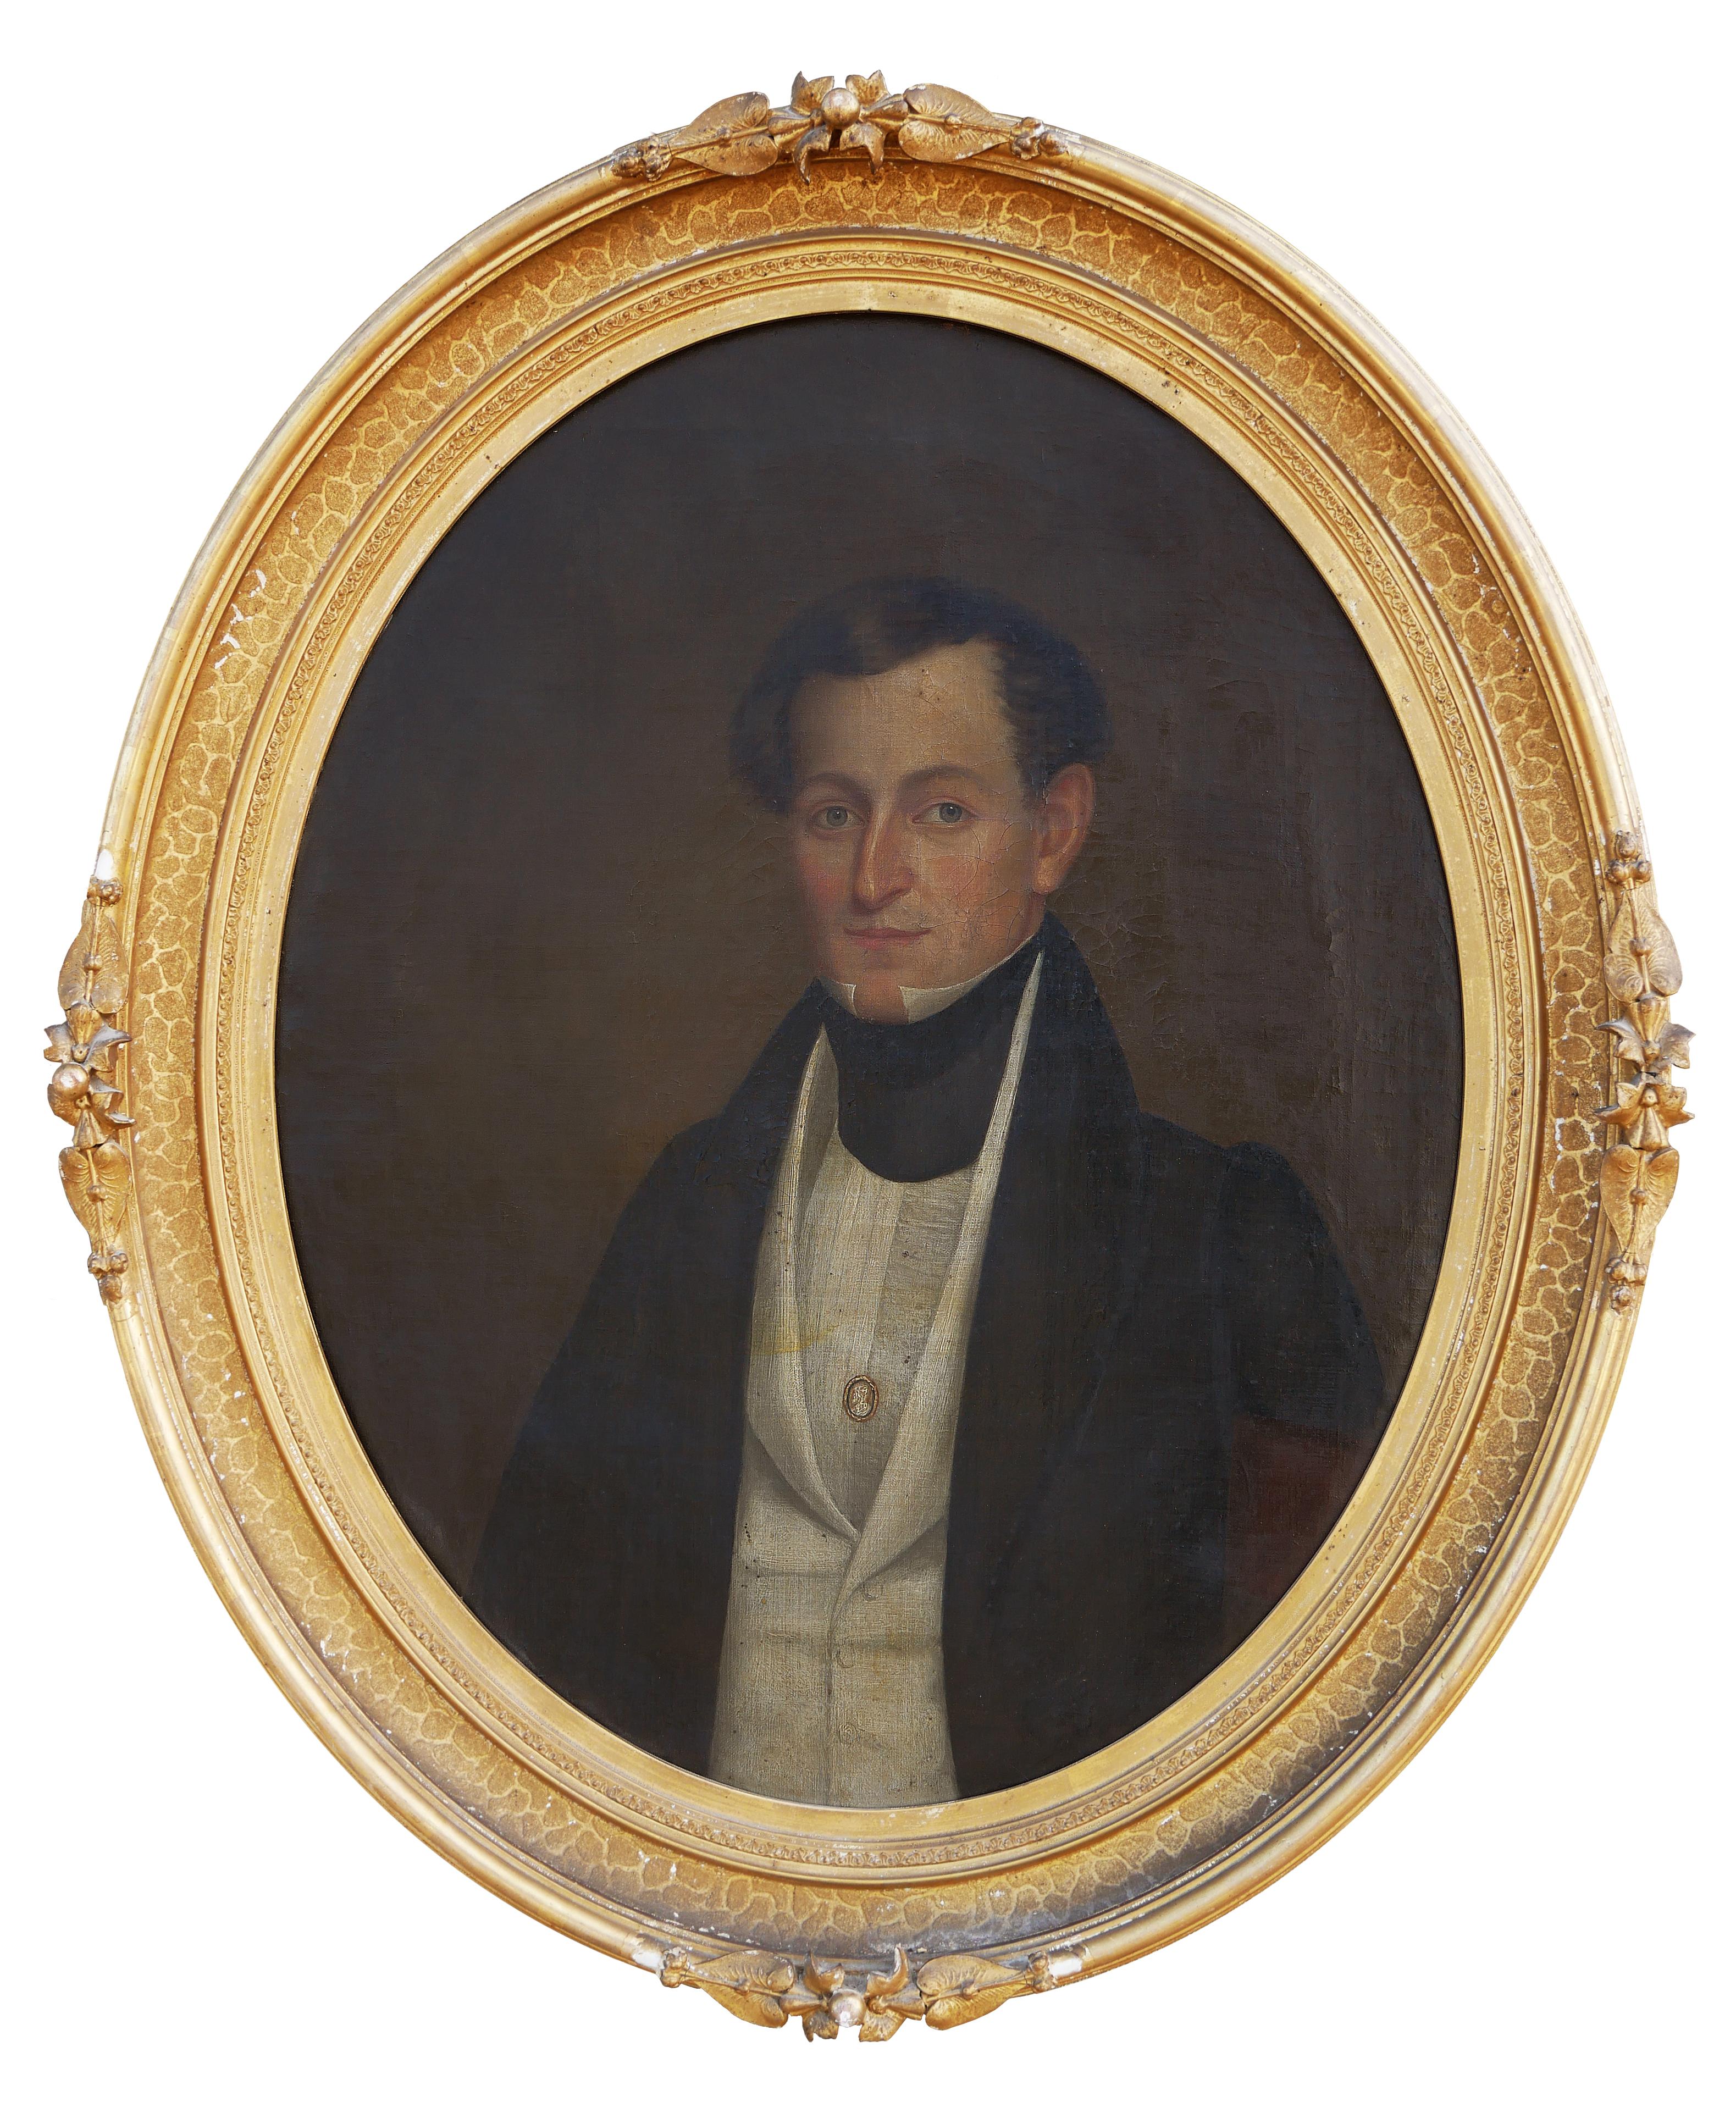 The painting features a 3/4 bust portrait of a gentleman from the Verplanck family of Orange County, New York. The painting shows a young man seated for her portrait in a fine black jacket and a white shirt. He exhibits an intense yet friendly face.